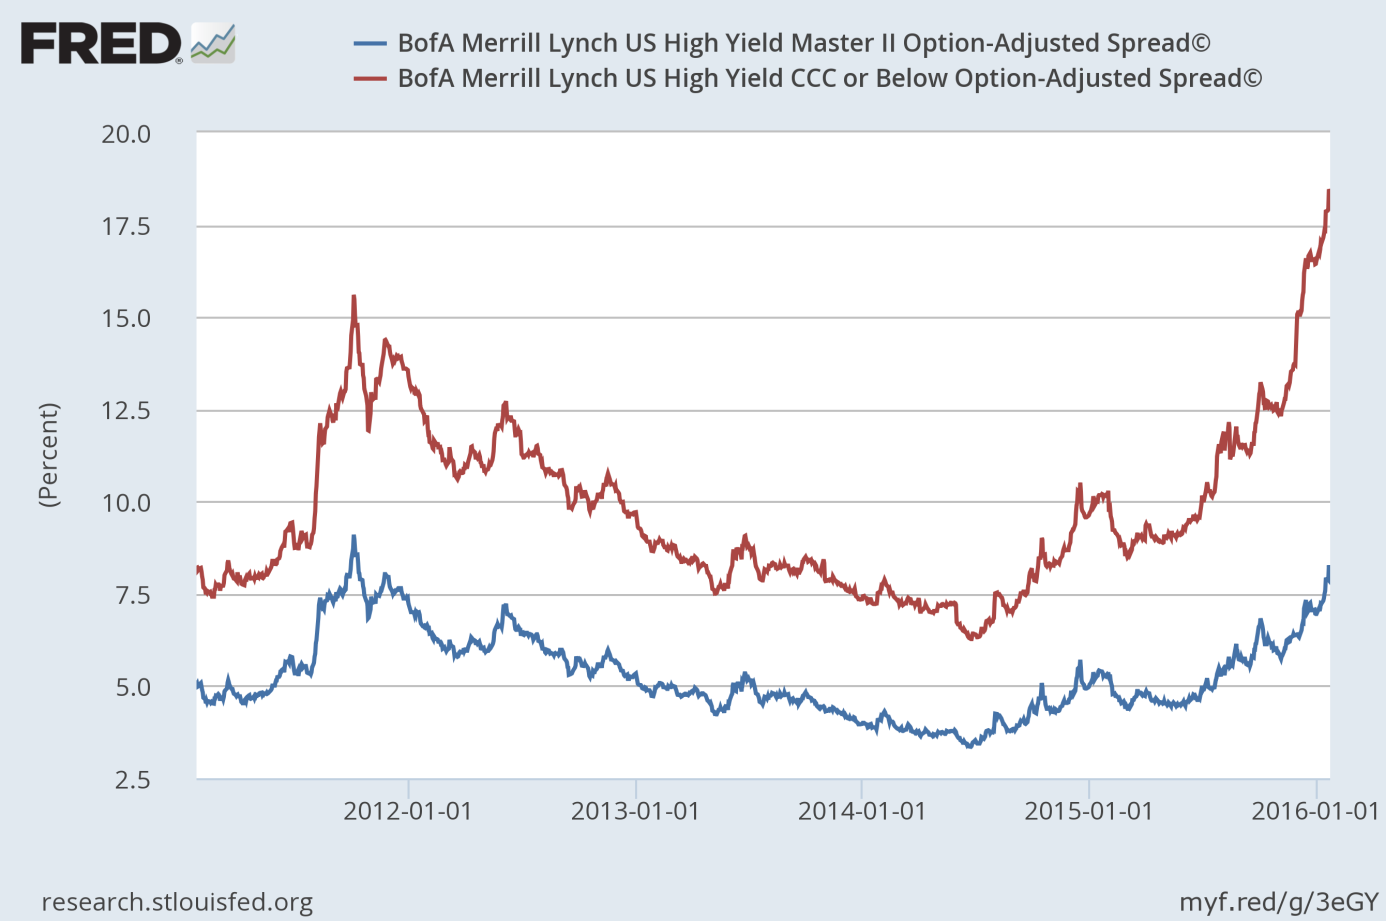 The BofA Merrill Lynch US High Yield Master II Option-Adjusted Spread (blue line) and the BofA Merrill Lynch US High Yield CCC or Below Option-Adjusted Spread (red line) over the last five years.